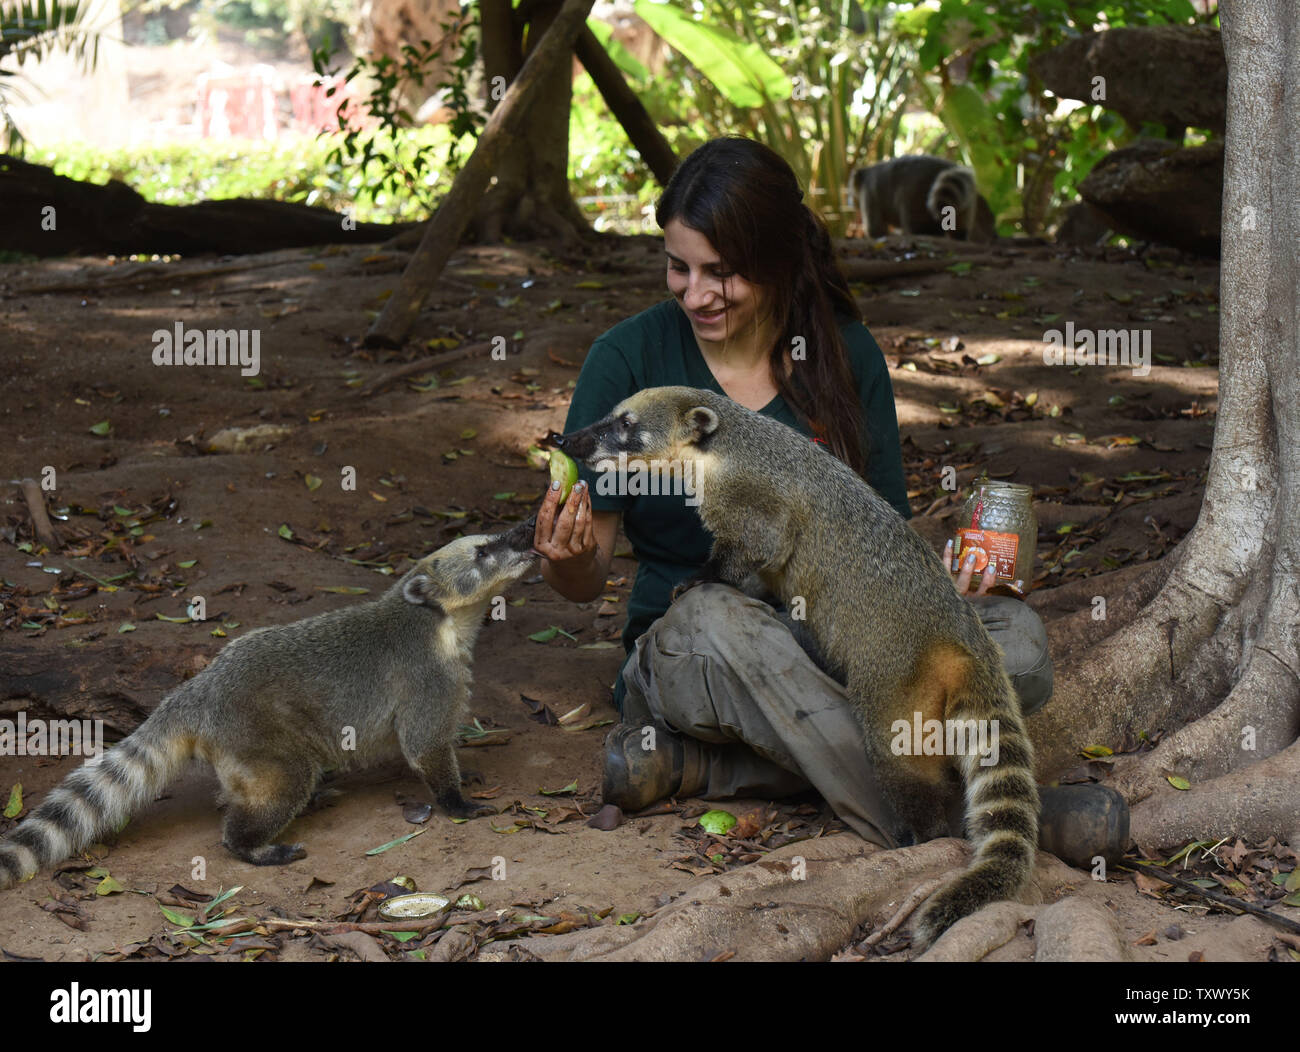 Israeli zookeeper Bar Braitbart gives apples dipped in honey to South American Coatis in honor of the upcoming Jewish New Year, Rosh HaShanah, at the Ramat Gan Safari, near Tel Aviv, Israel, September 17, 2017. Jews around the world eat apples dipped in honey on Rosh HaShanah to symbolize hope that the coming year will be 'sweet.' Photo by Debbie Hill/UPI Stock Photo